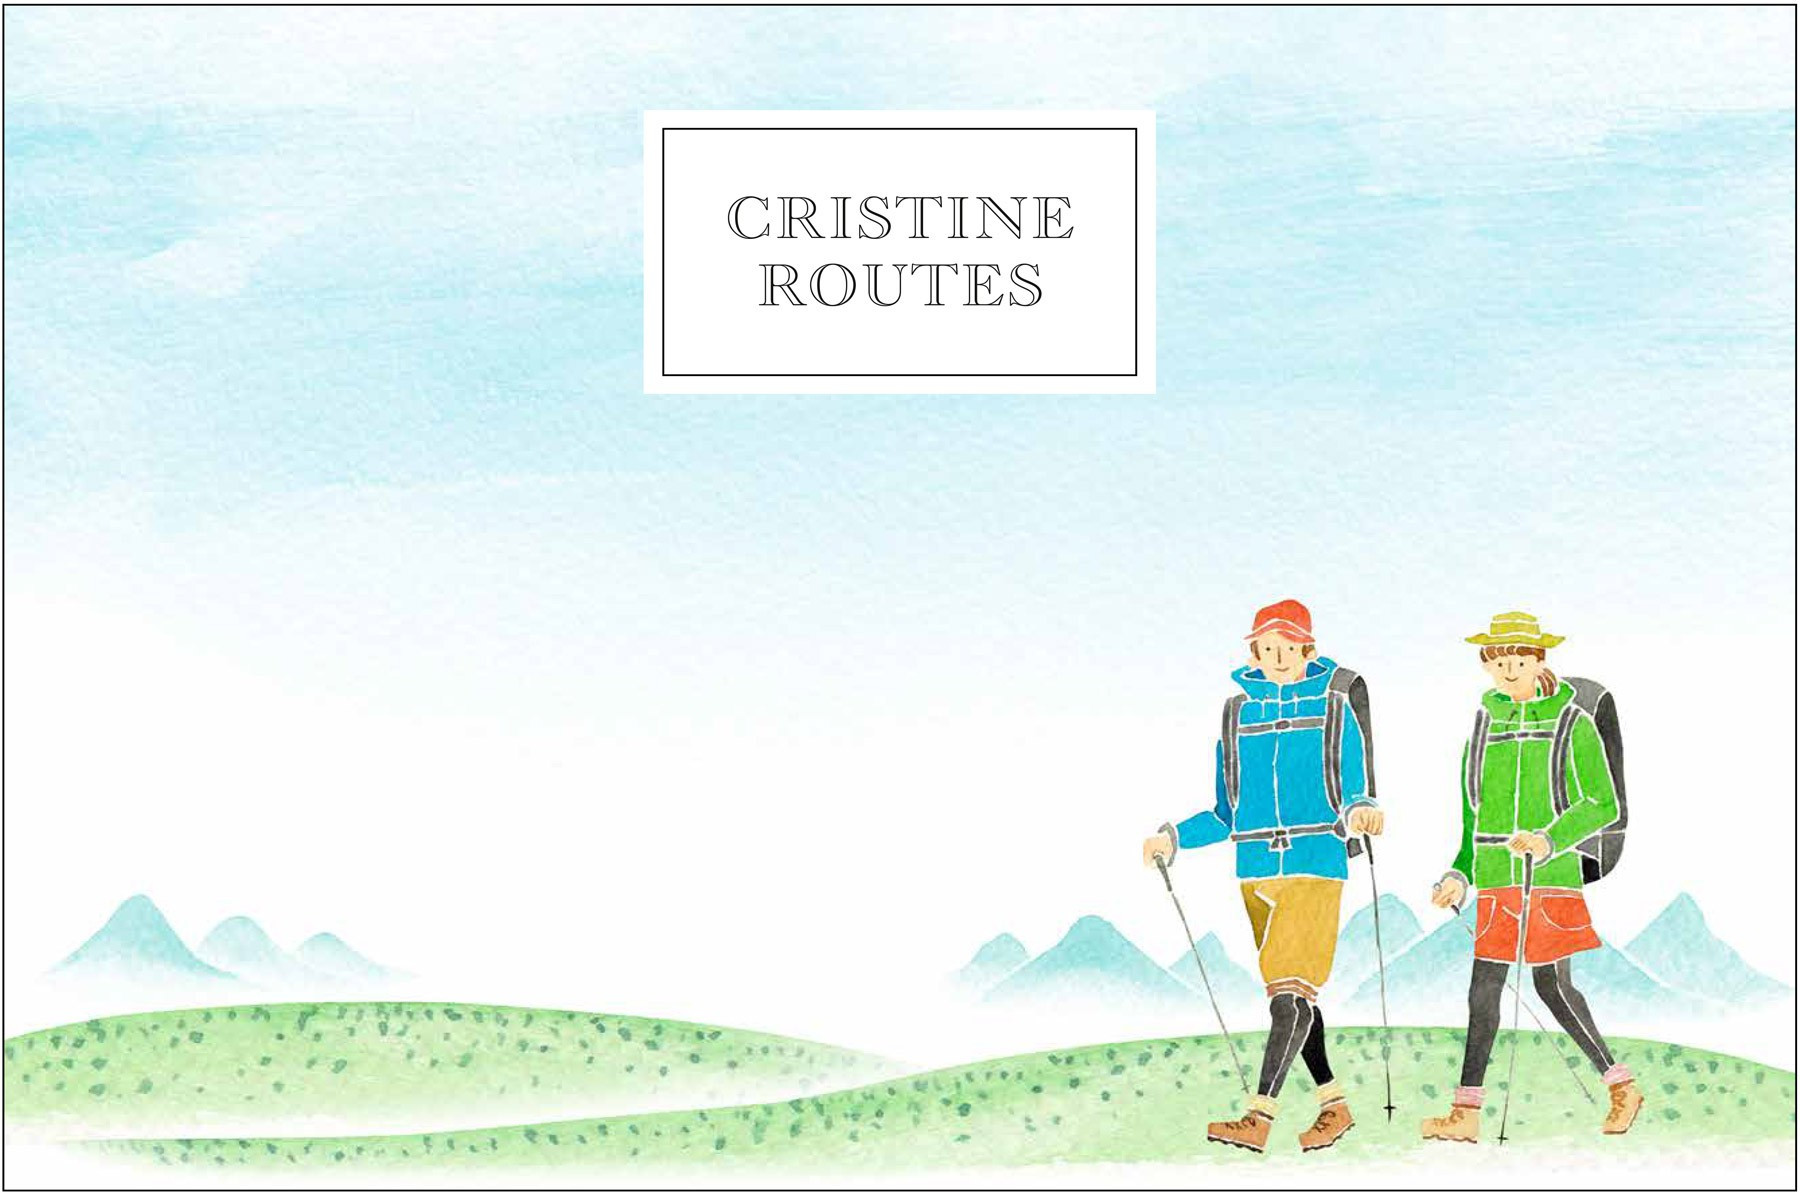 Illustration with mountain hikers and text "Cristine Routes".